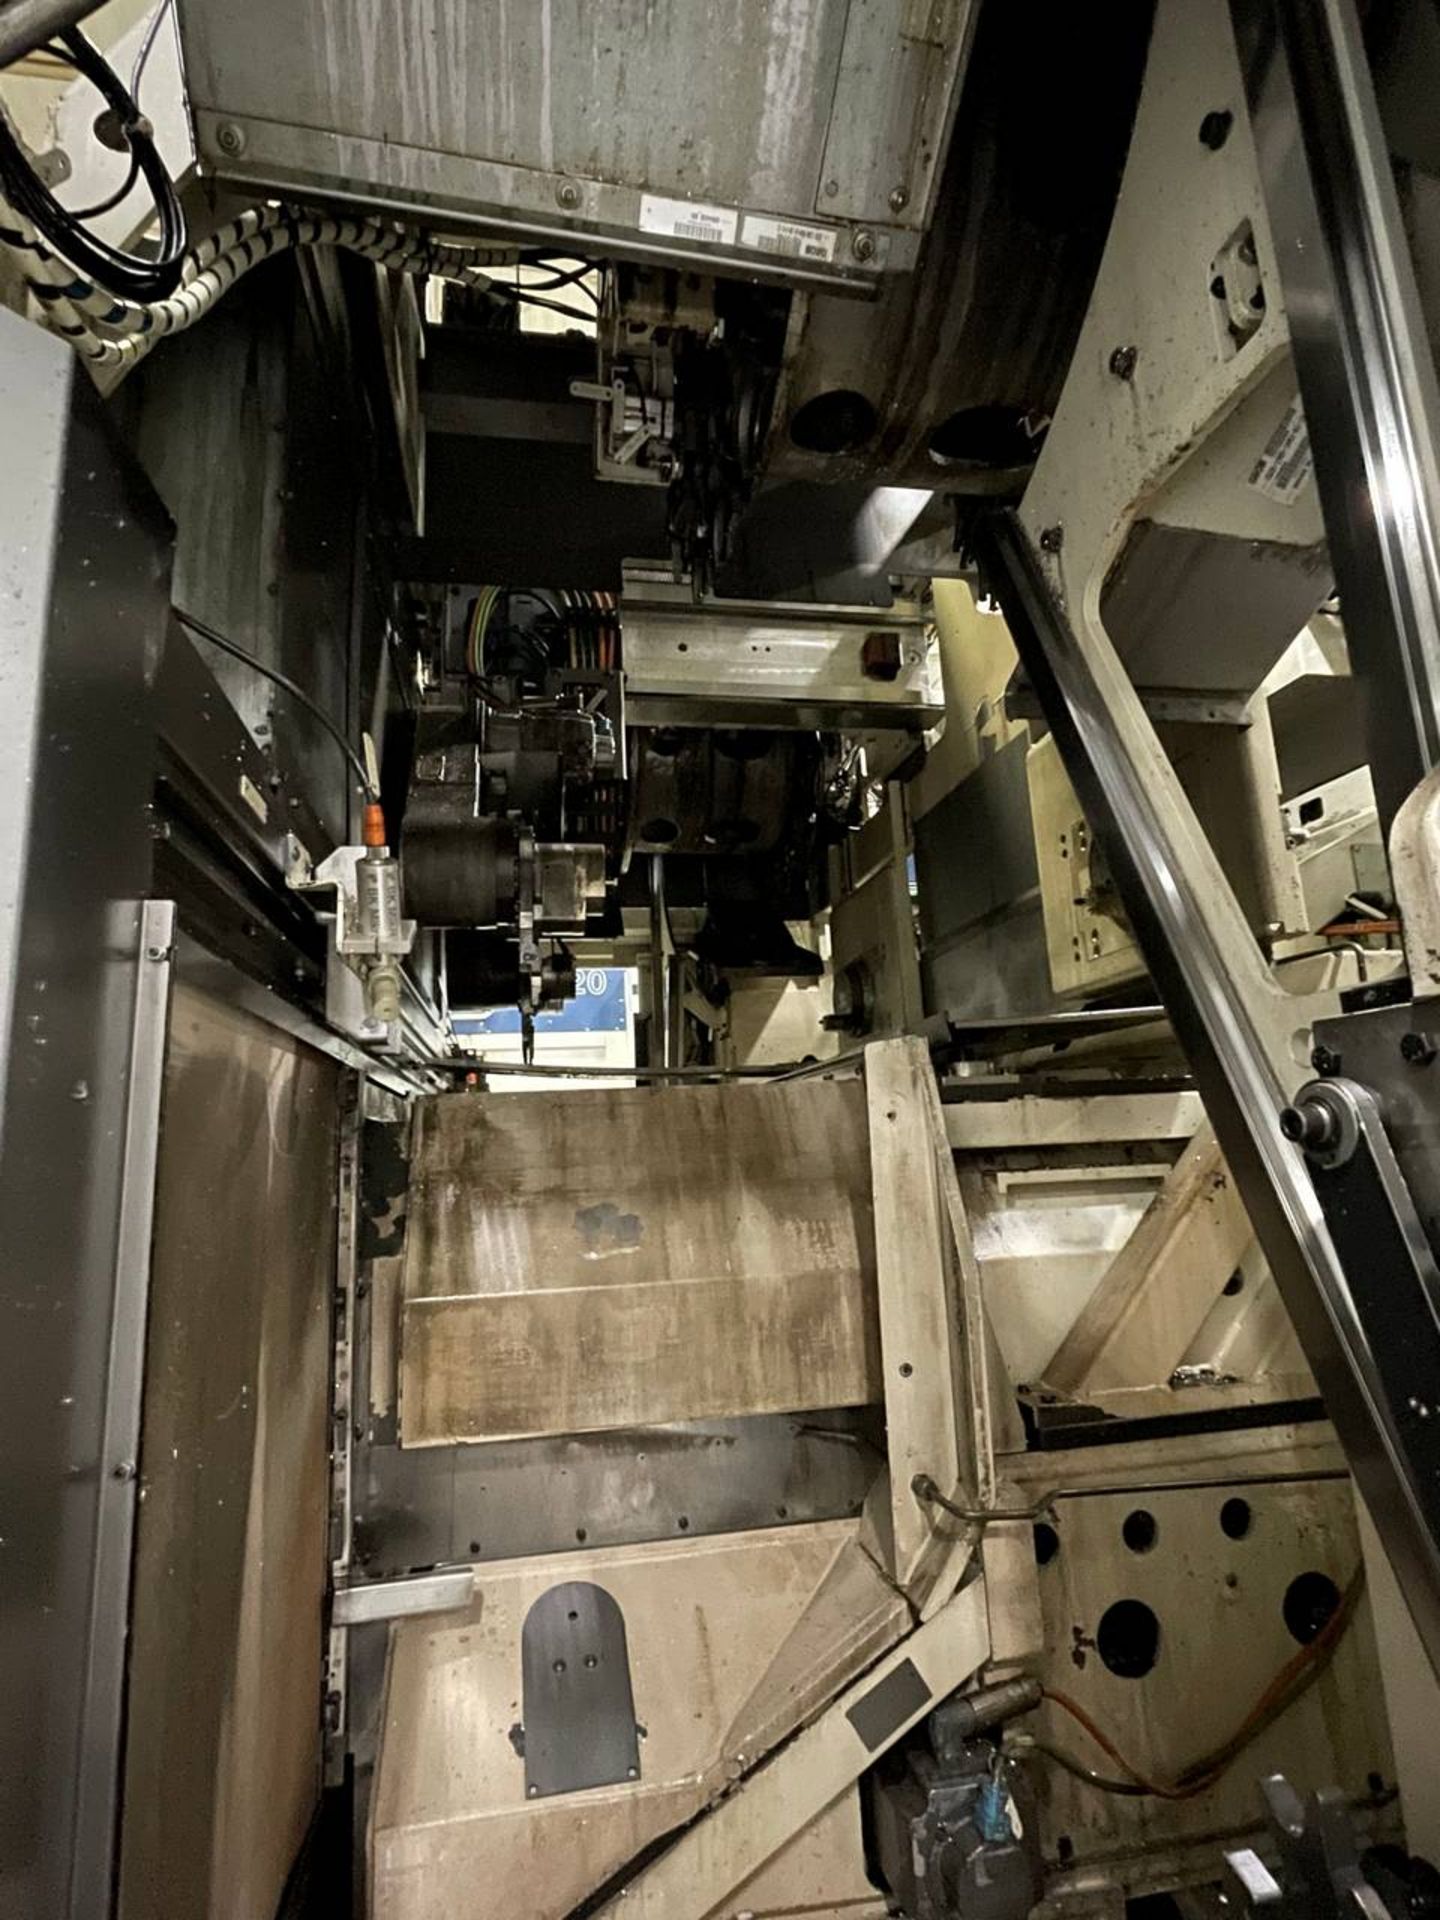 2013 Grob G520 Horizontal CNC Twin Station Machining Center with 5th Axis - Image 8 of 8